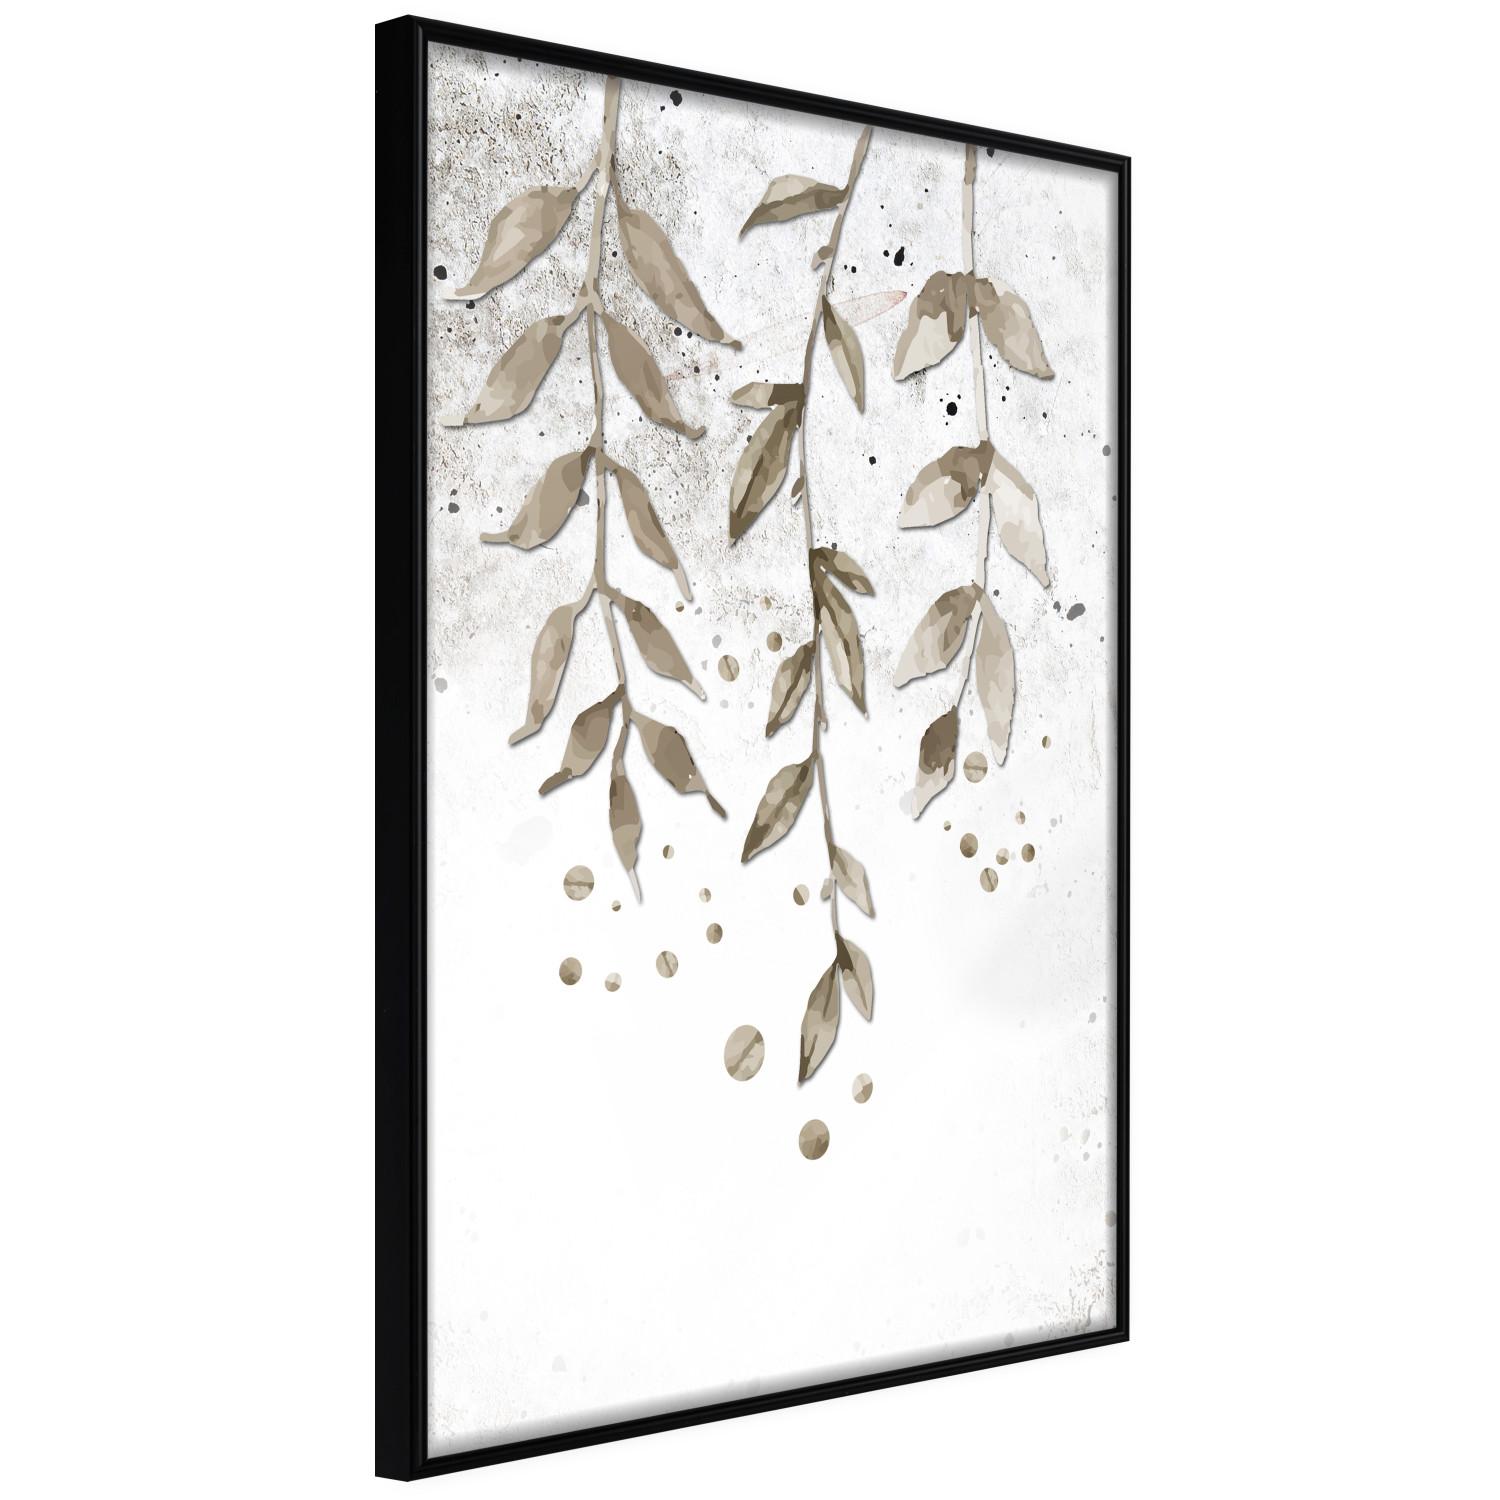 Gallery wall Hanging Branches - green tree leaves on a background with non-uniform colors